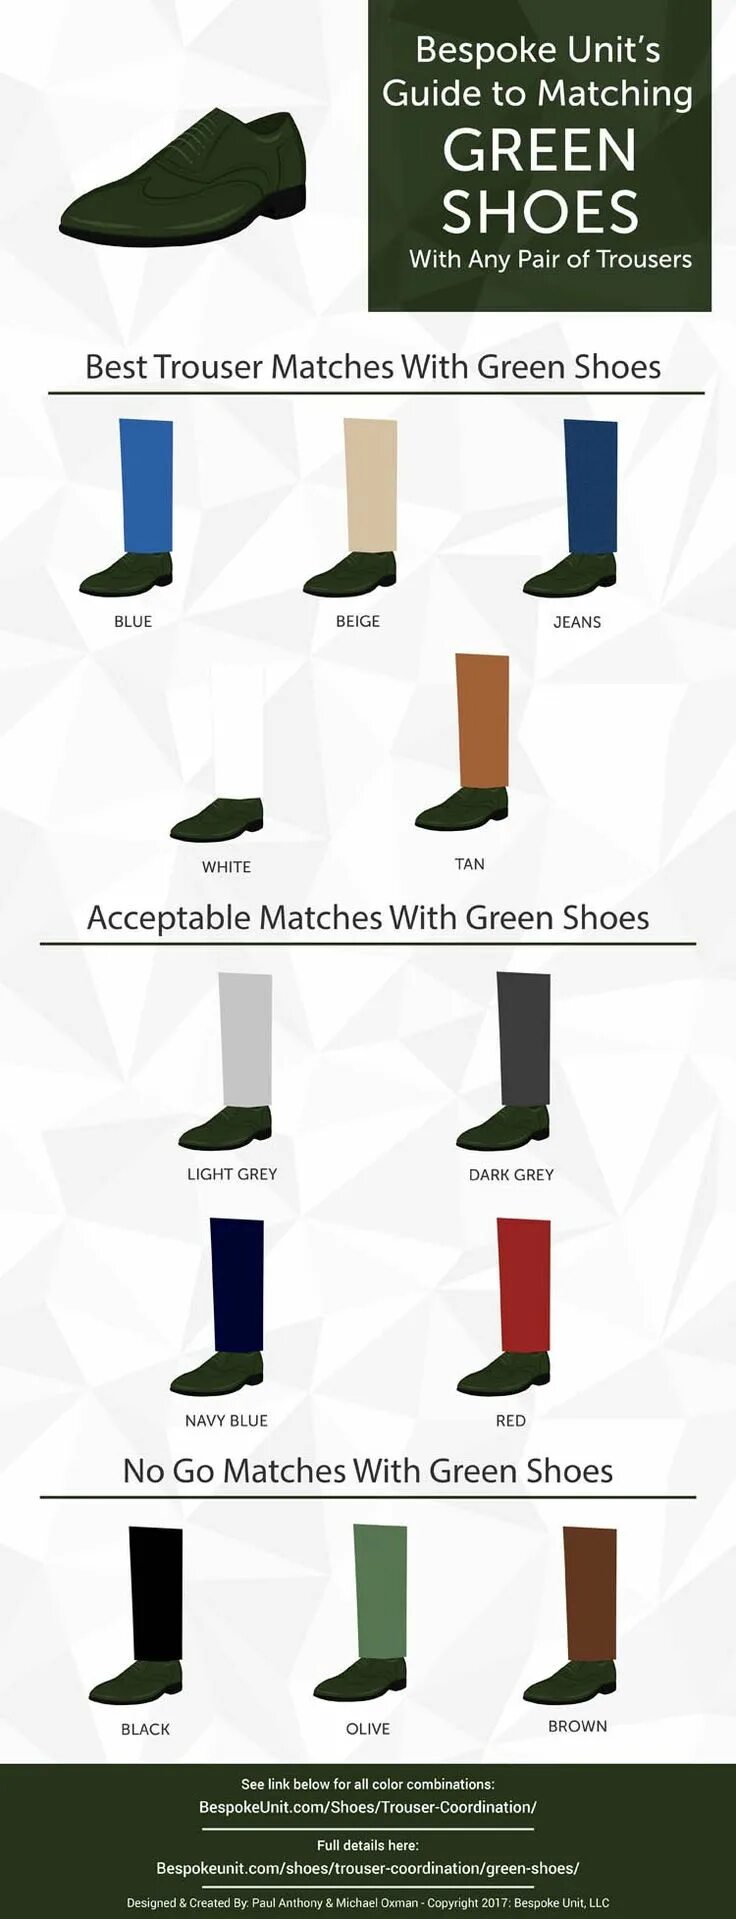 Match and Match обувь. Match Match туфли зеленые. What matched Green. What Shoes to Wear with Bell-bottom trousers.